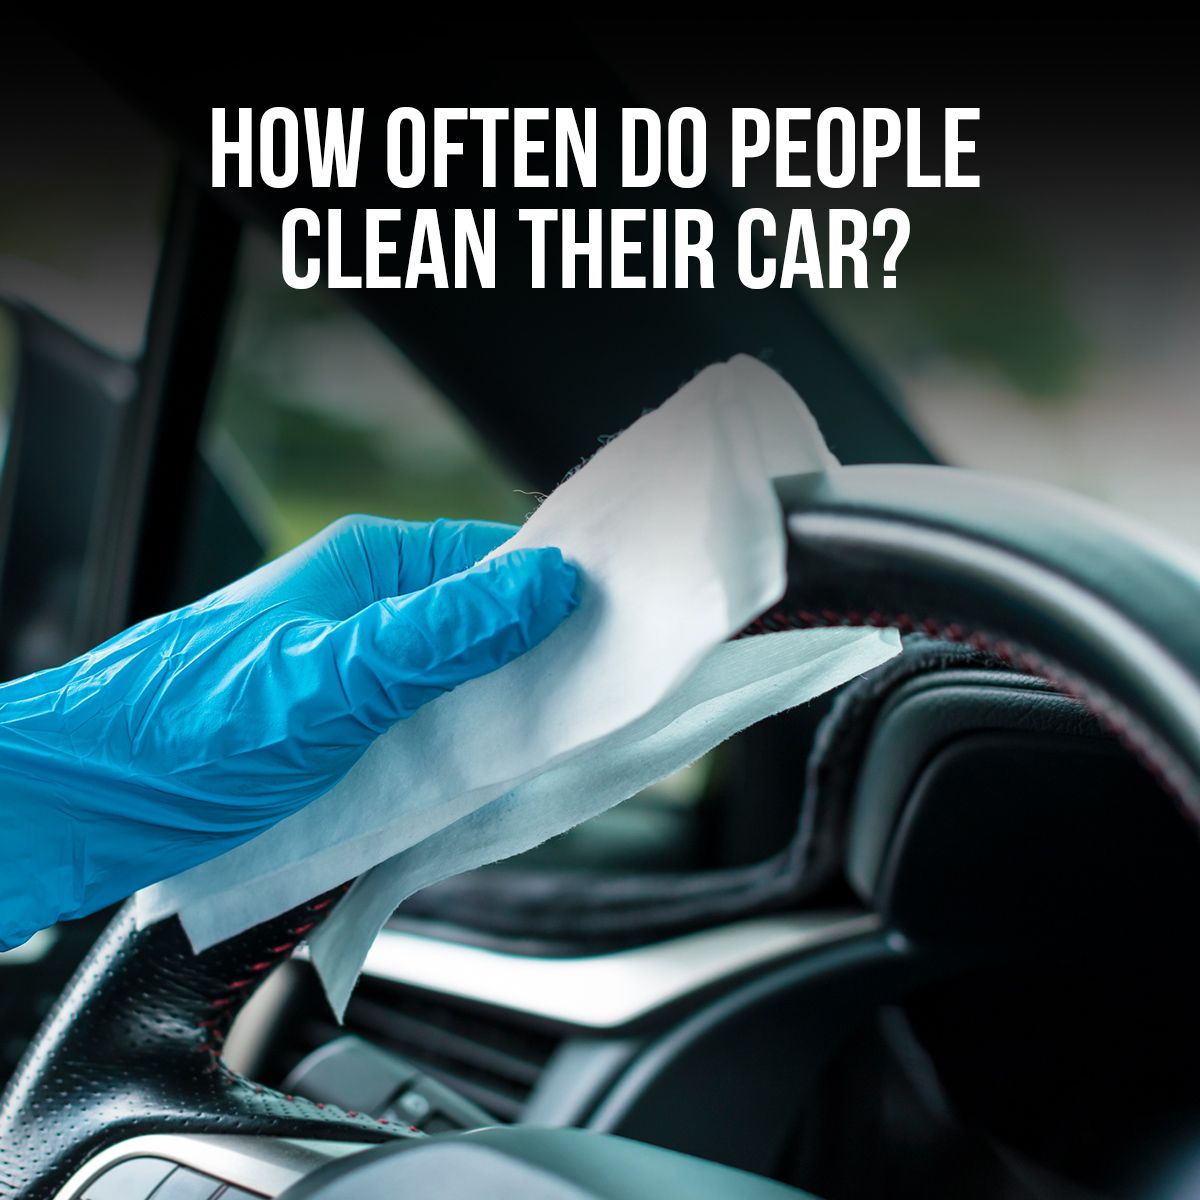 How Often Do People Clean Their Car?